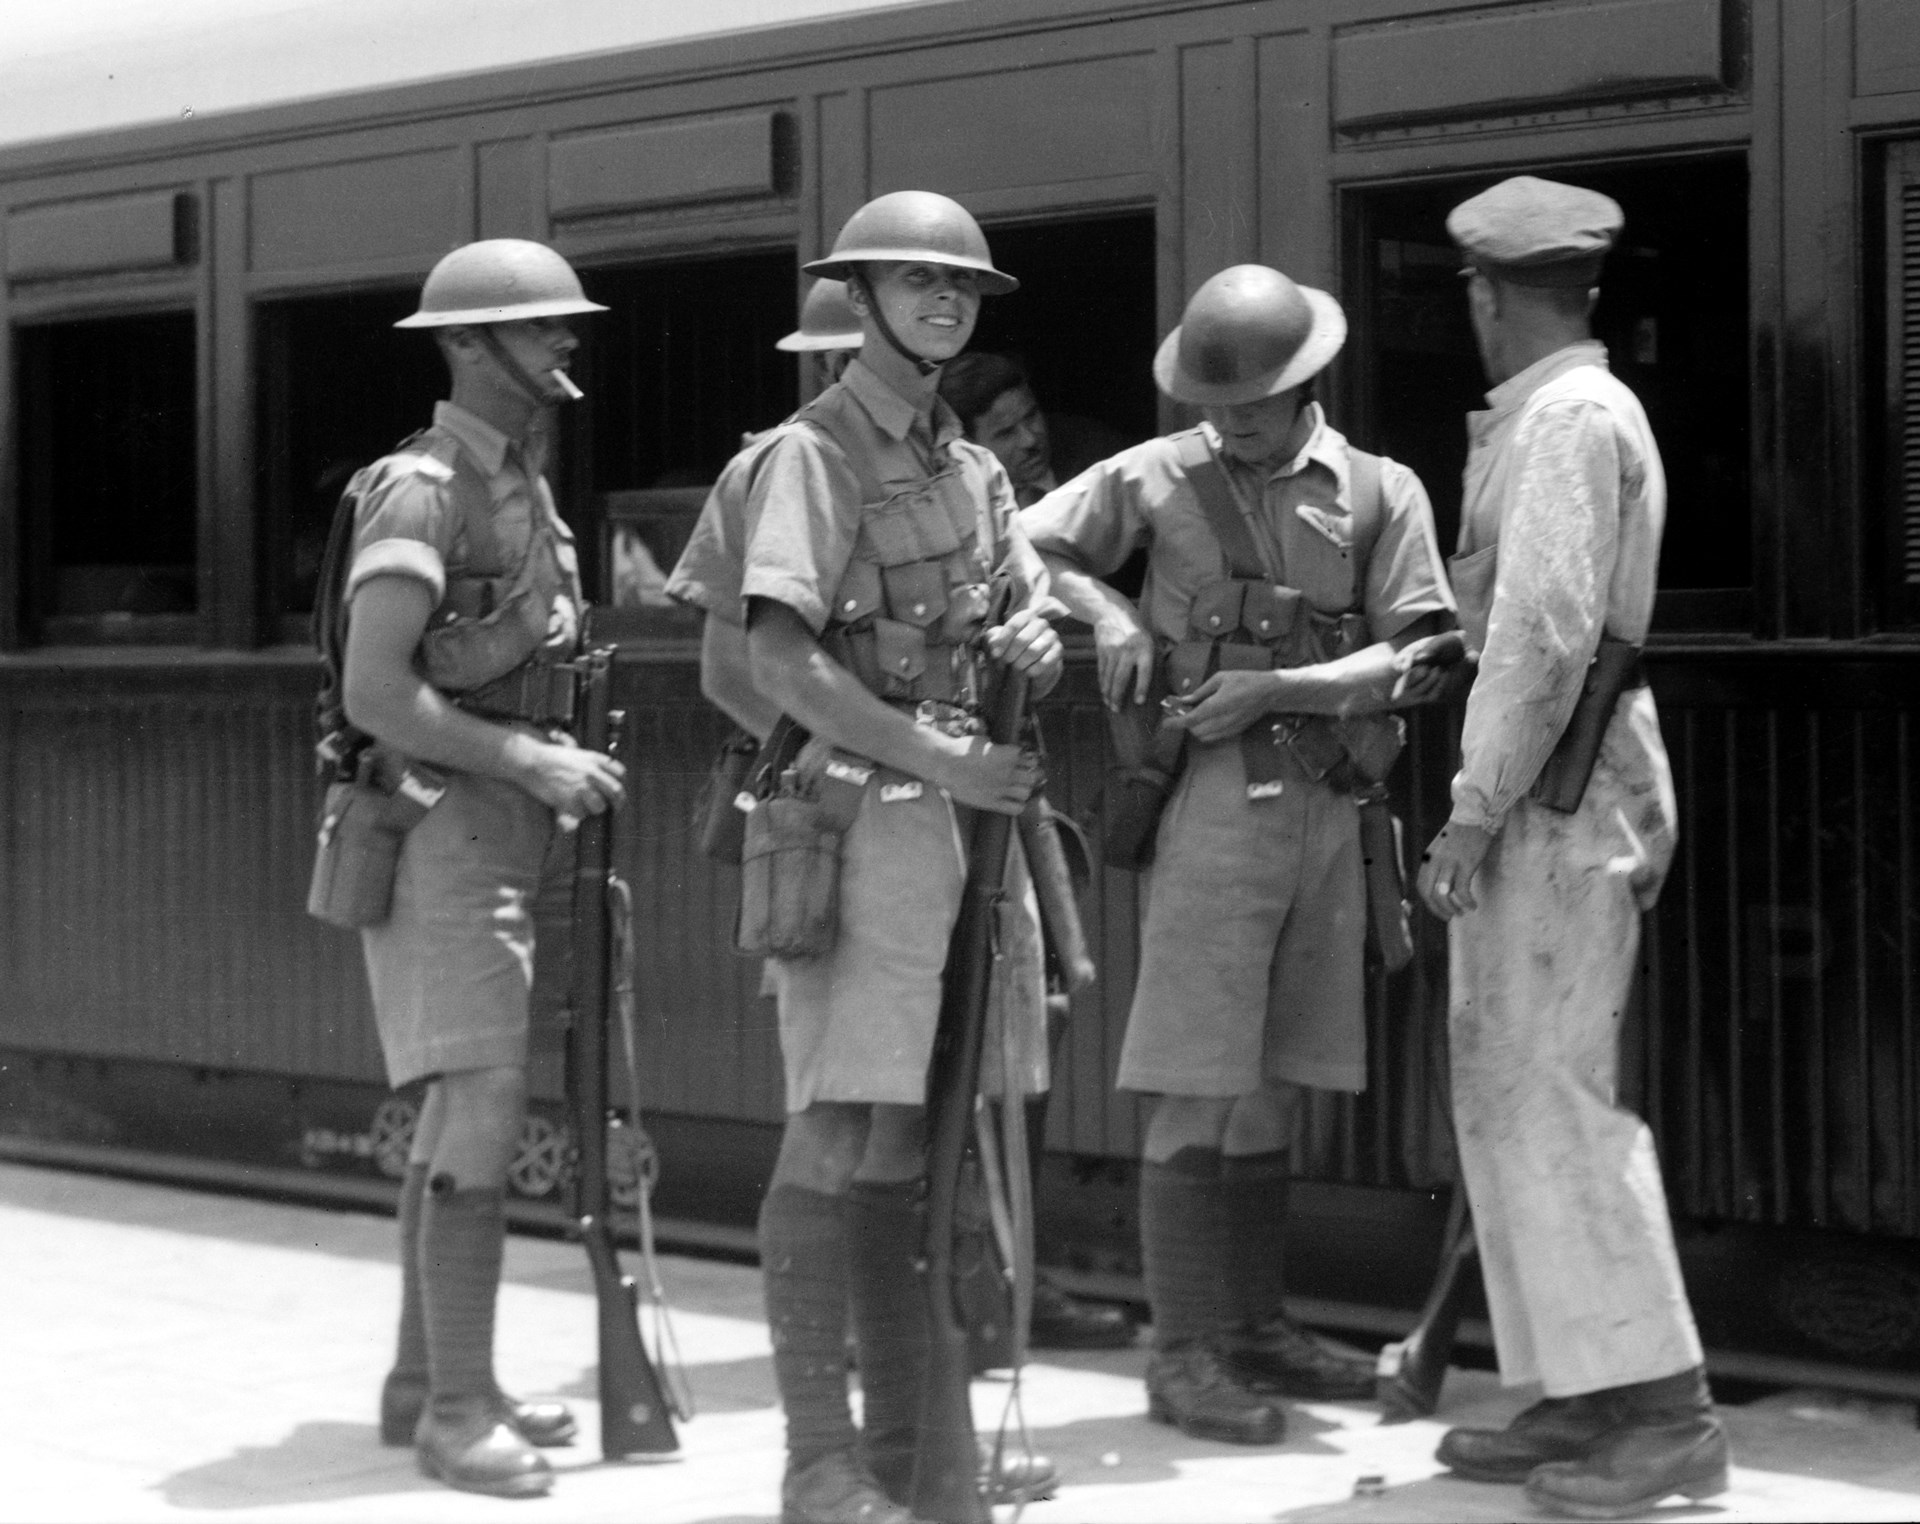 British troops guarding the railway station at Haifa during the 1936 revolt.  Equipped with tropical kit and the excellent Rifle No.1 Mk. III, the men were at least well-supplied, if not well-informed about the confusing situation.  The railway worker carries an unidentified revolver.  Library of Congress image